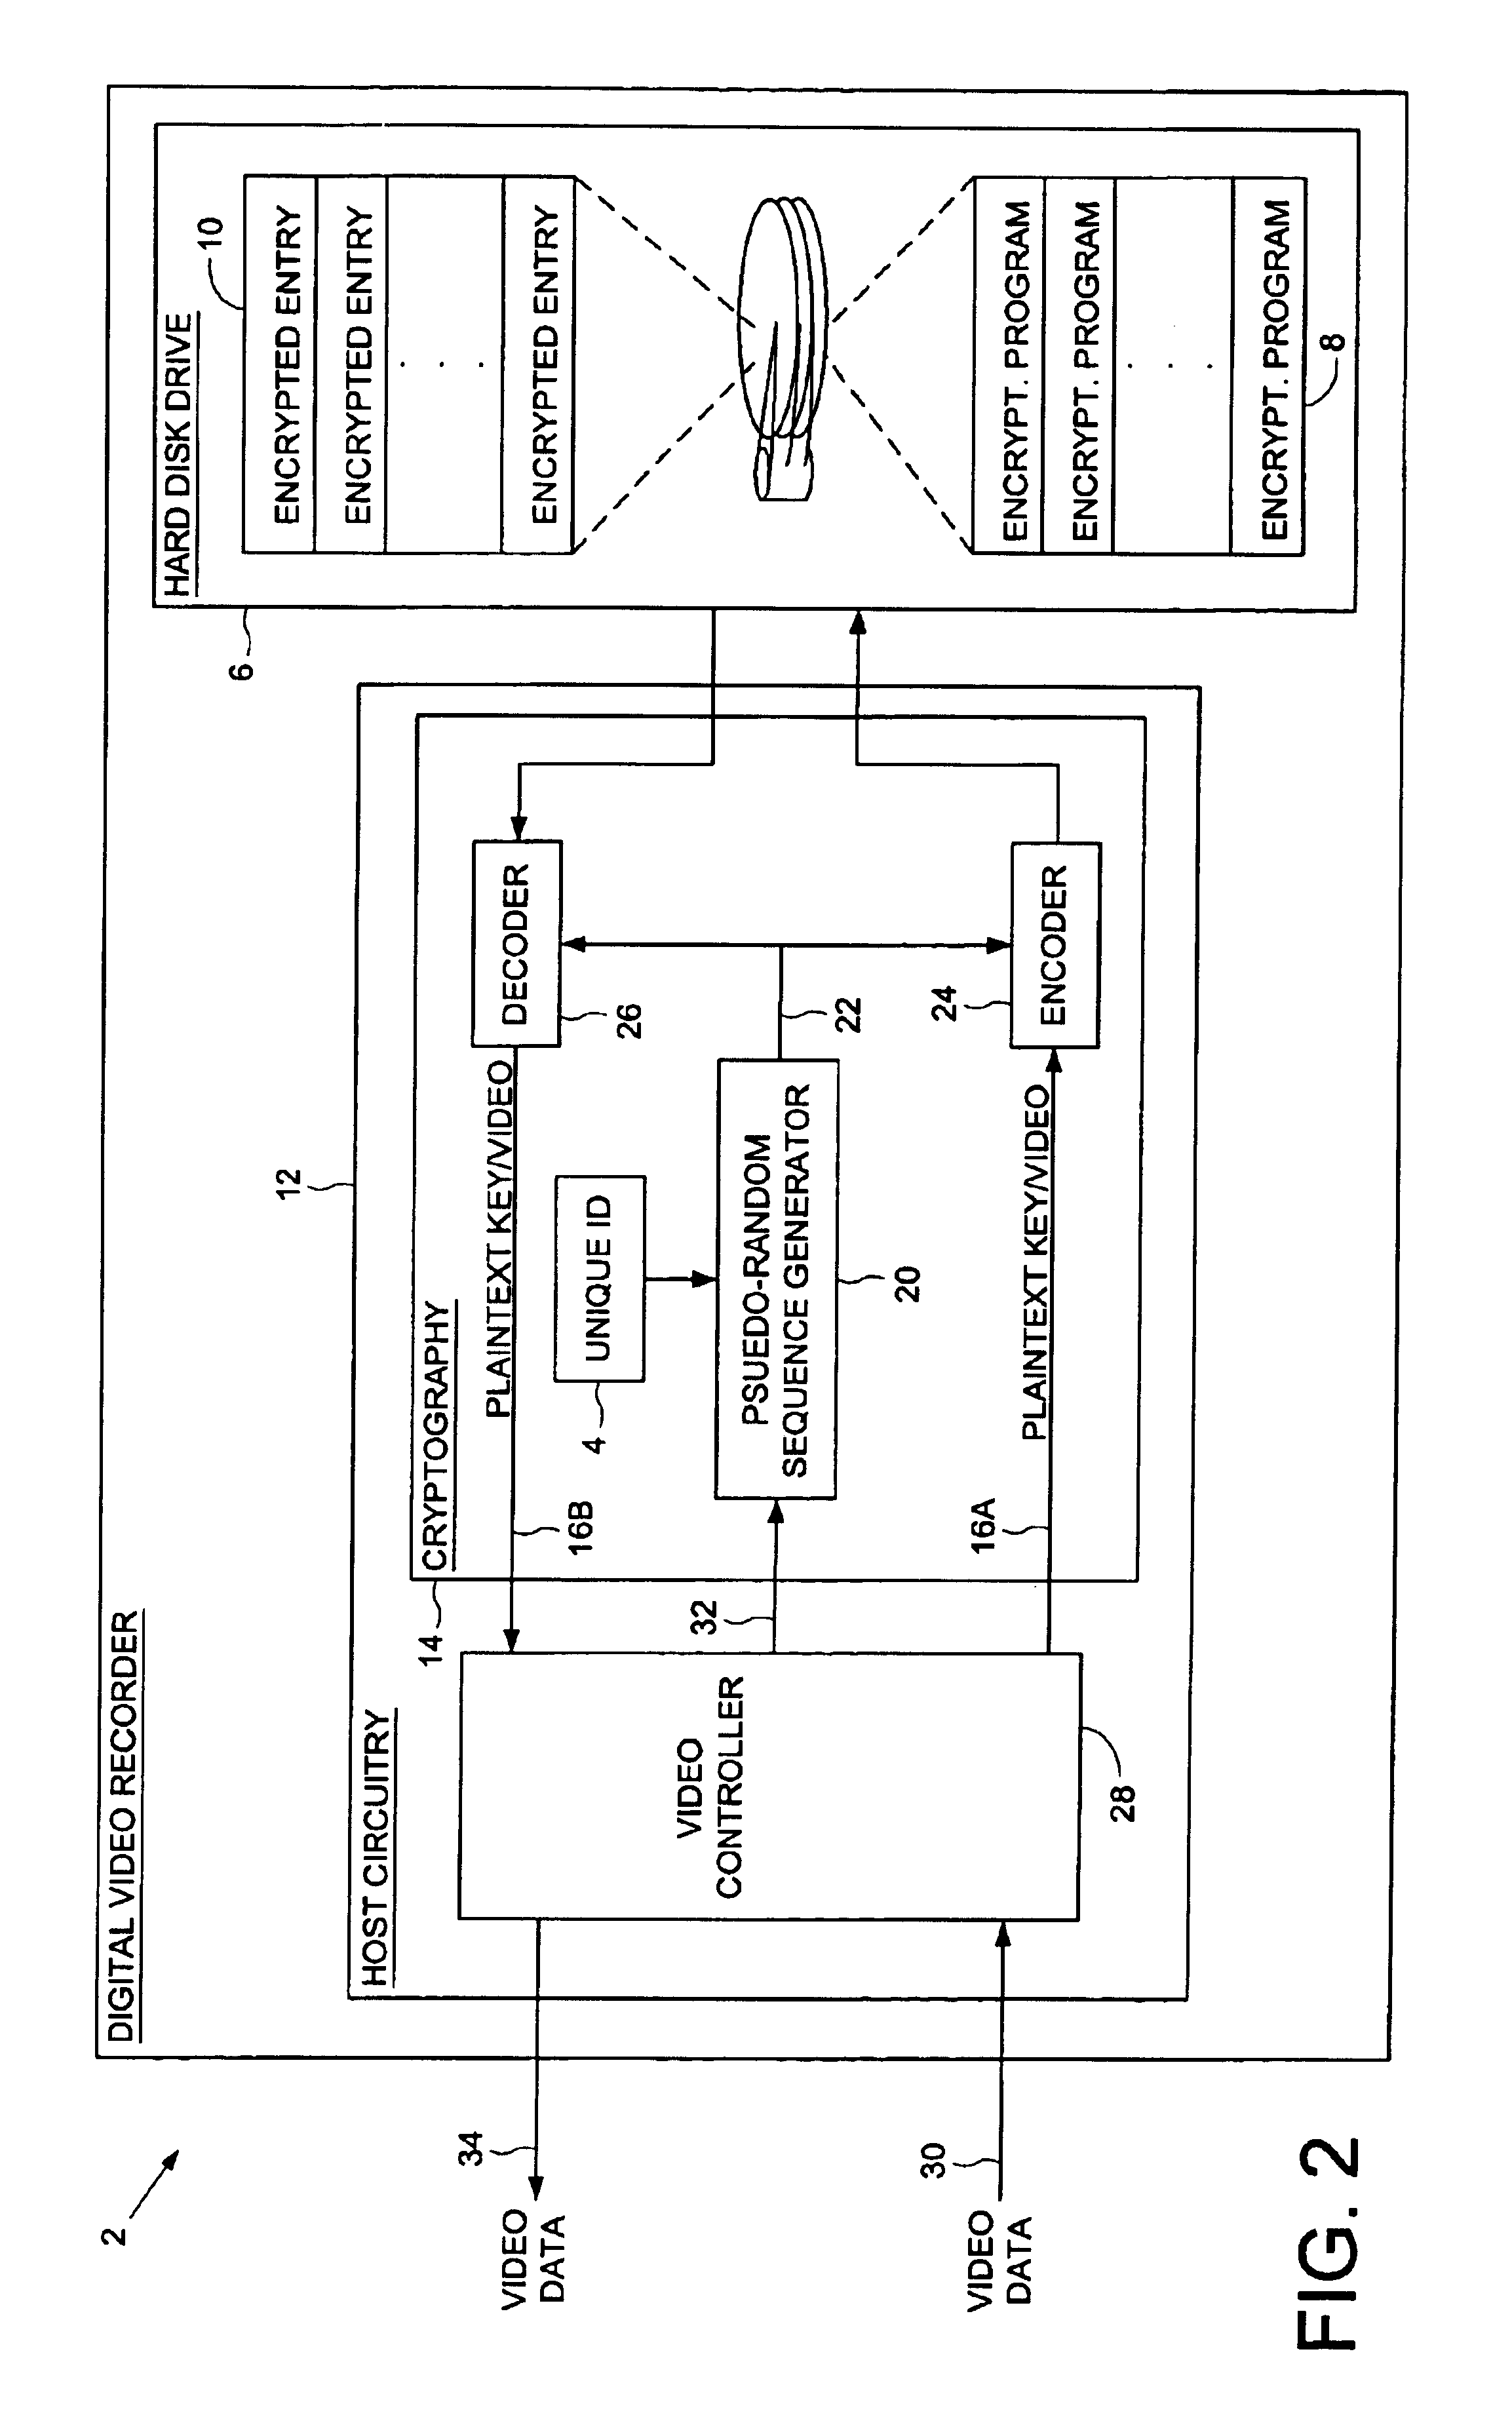 Digital video recorder employing a unique ID to interlock with encrypted video programs stored on a storage device